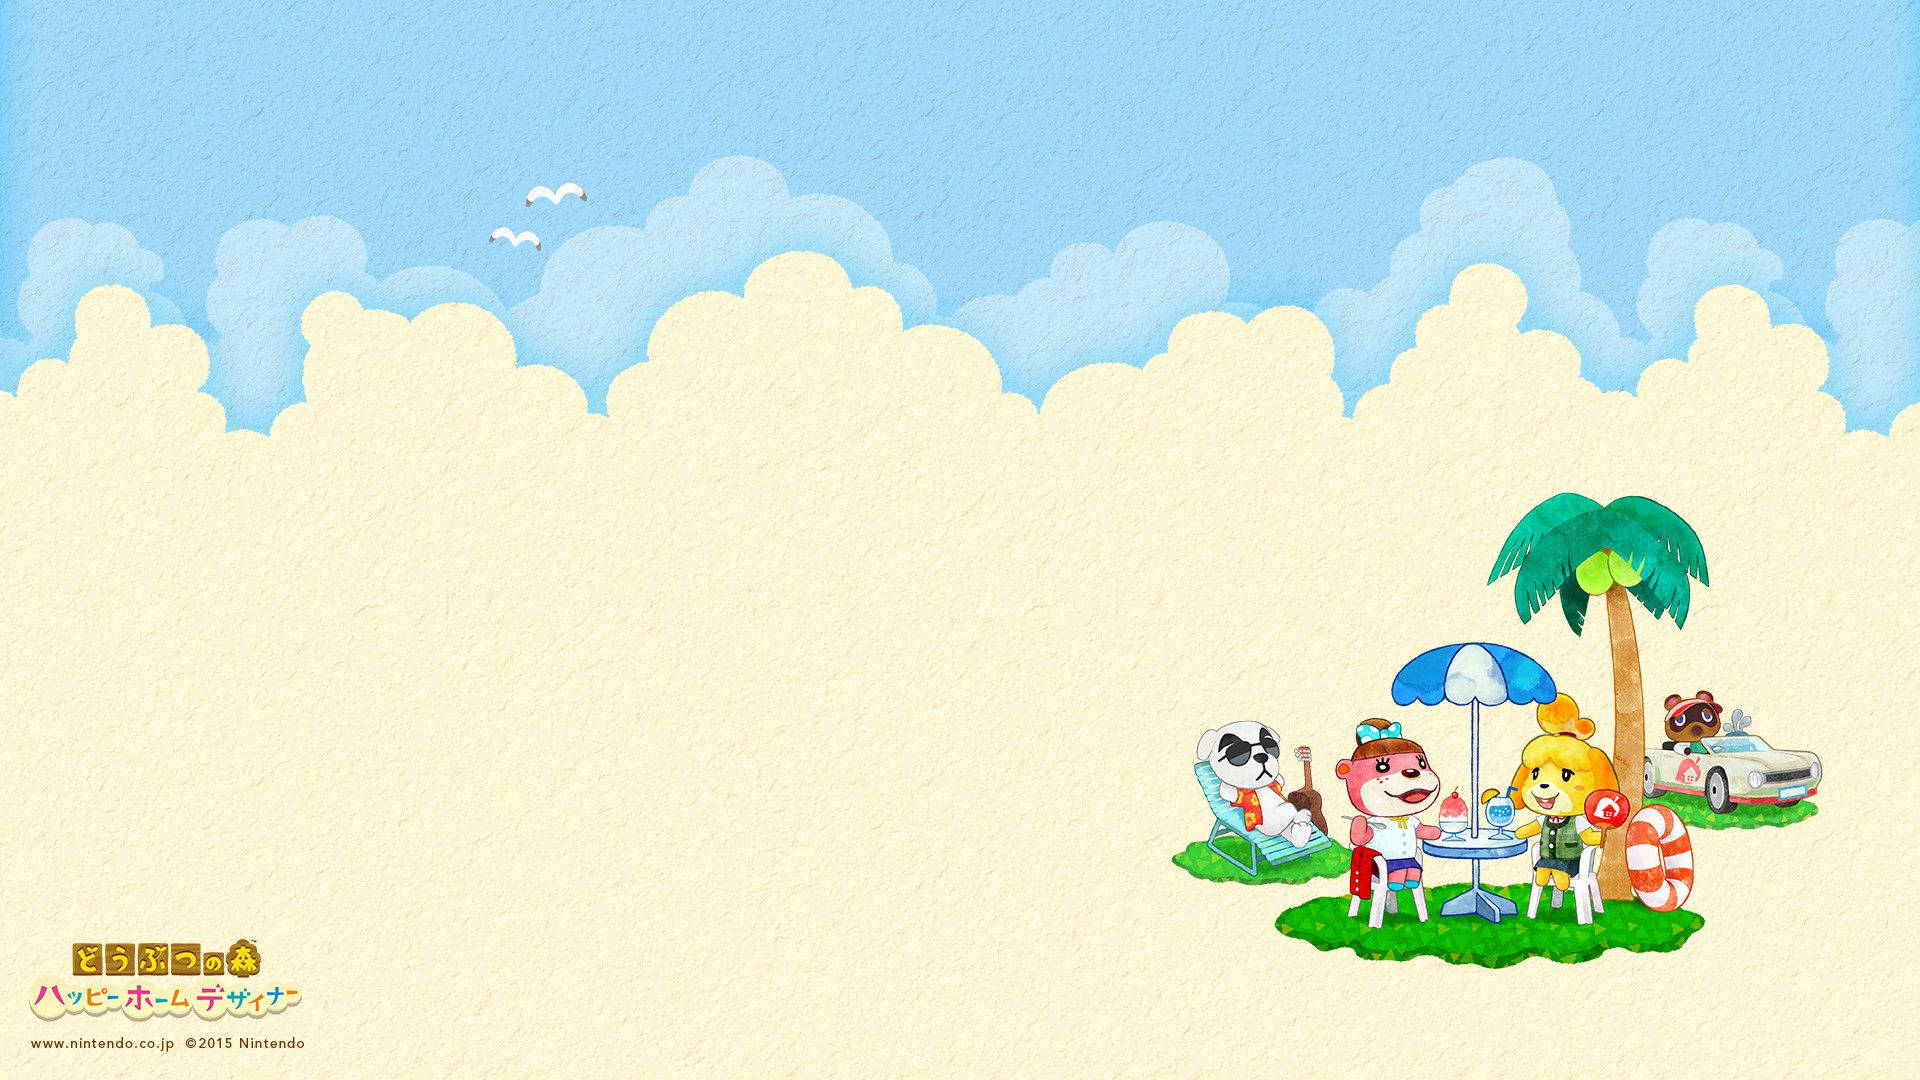 All Together for a Friendlier Tomorrow in Animal Crossing Wallpaper